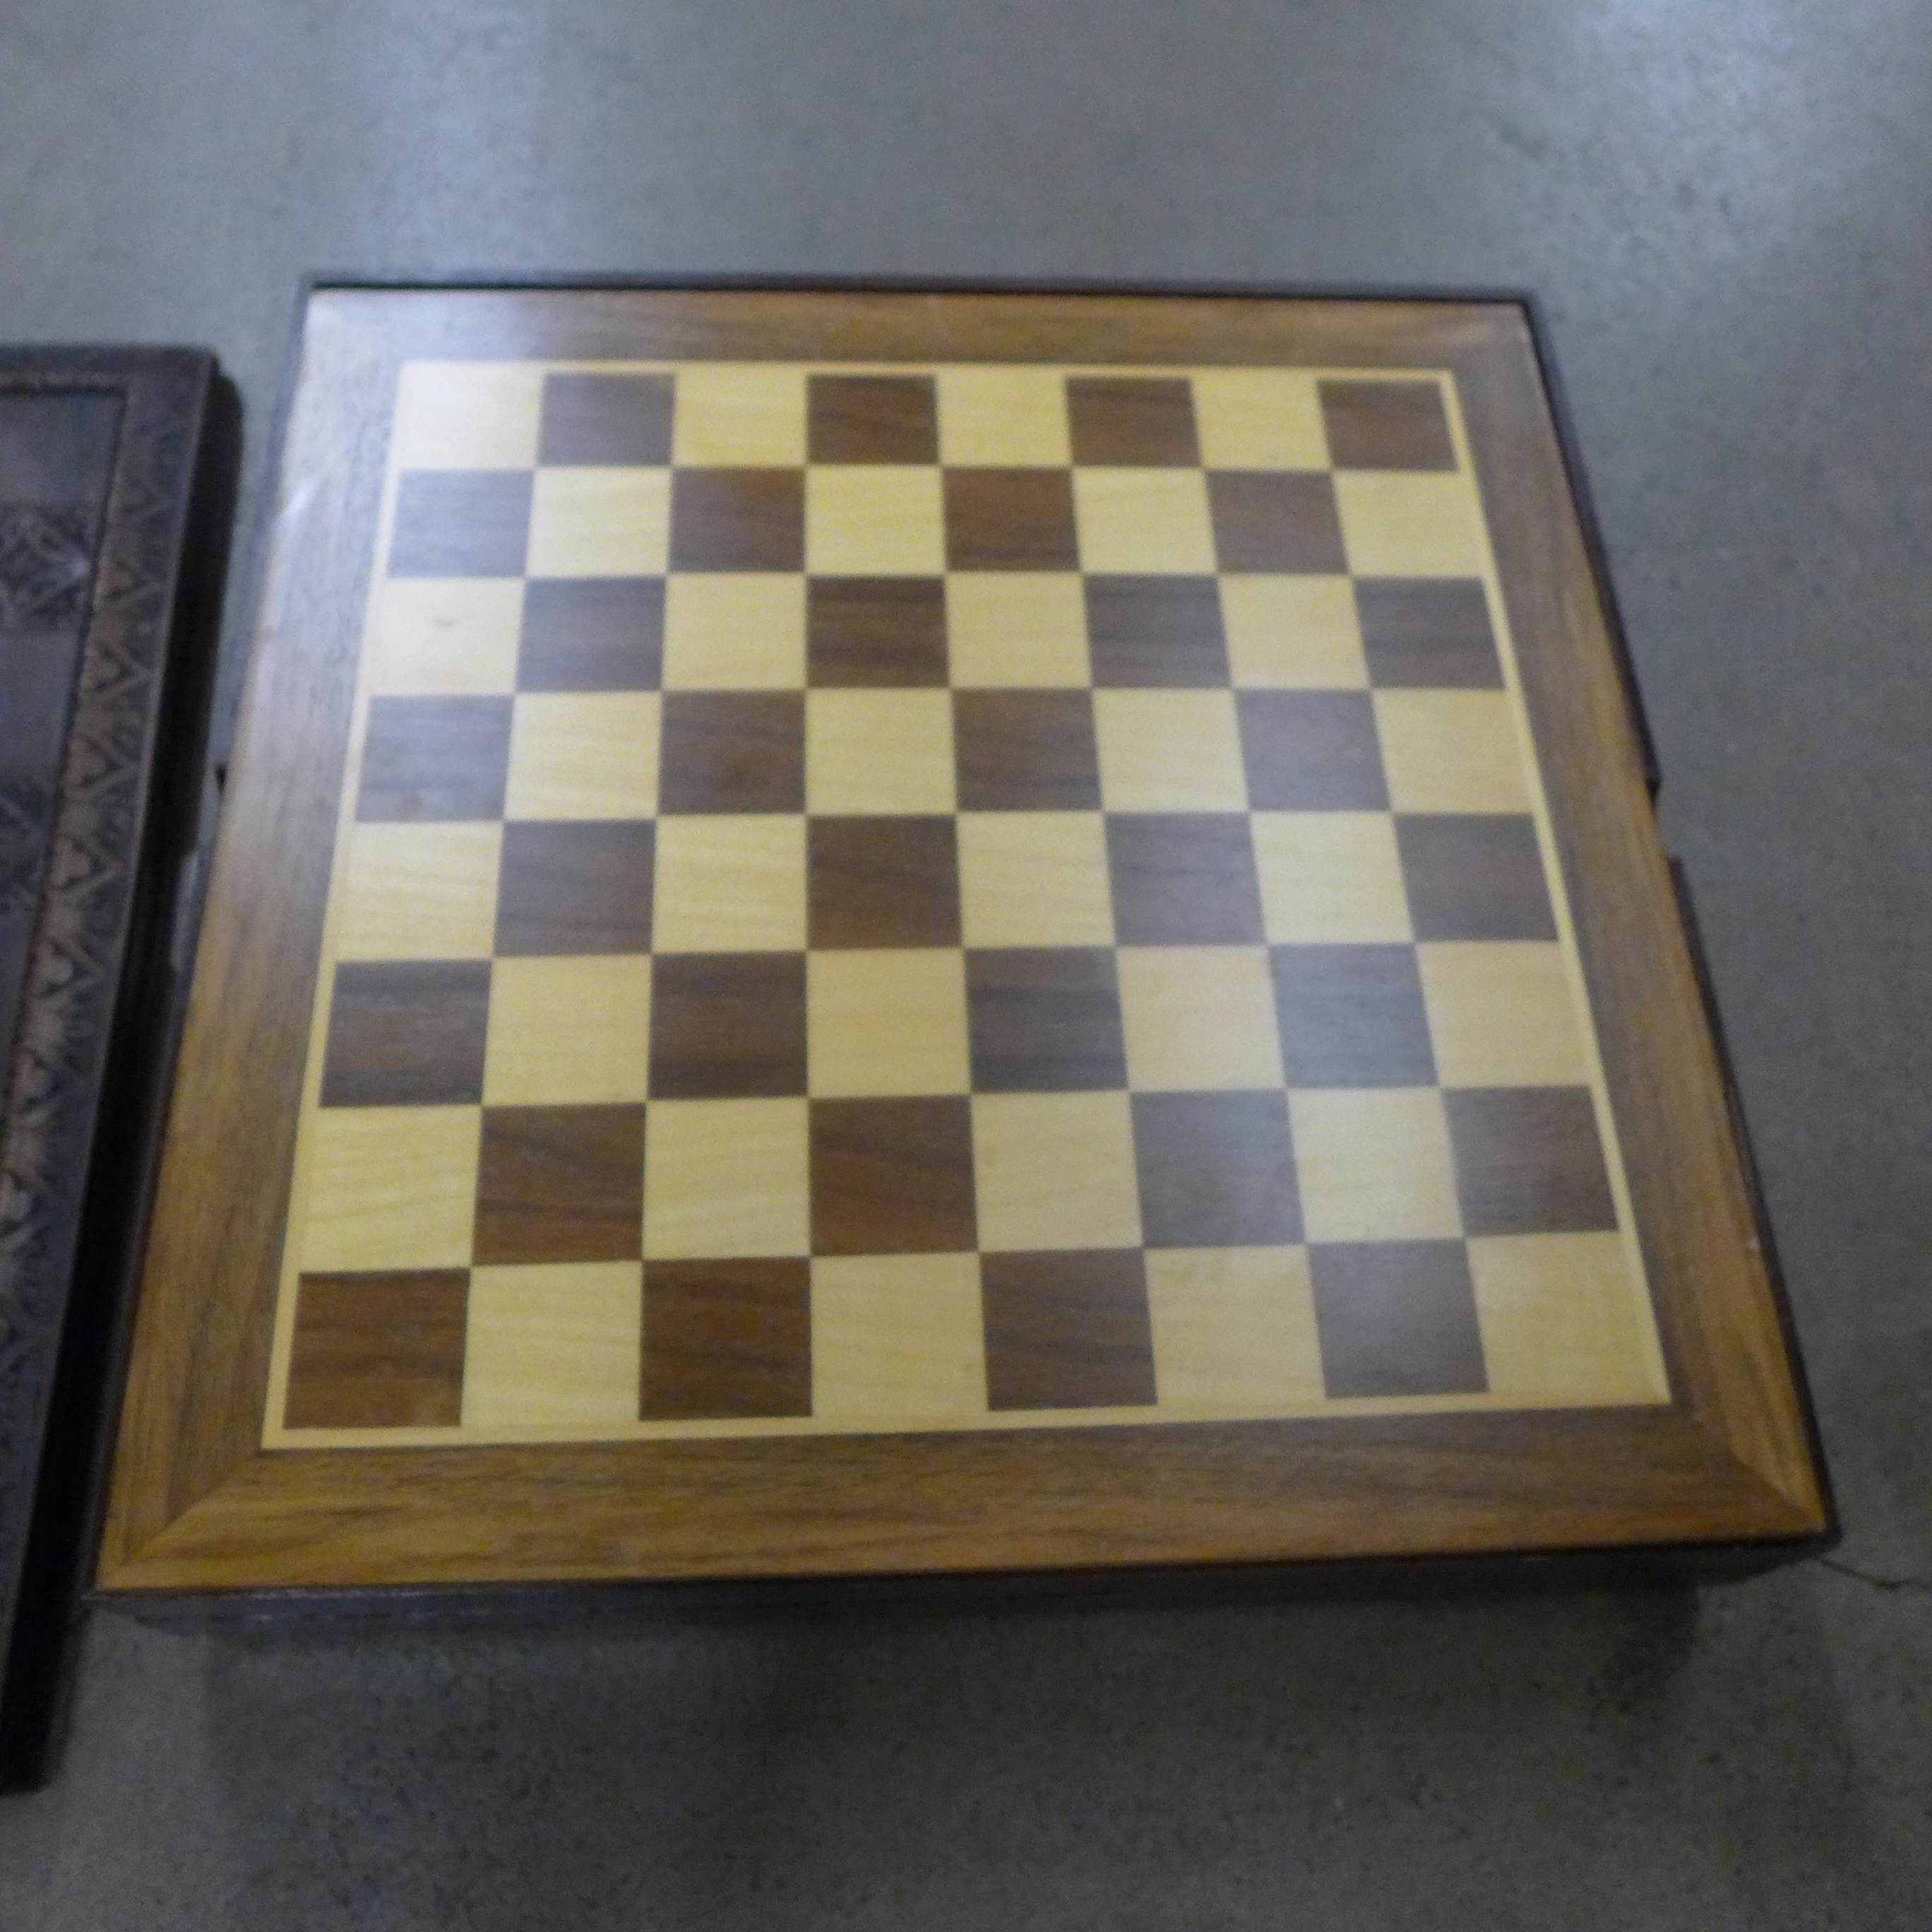 A collection of board games including chess sets, dominoes and playing cards - Image 4 of 5